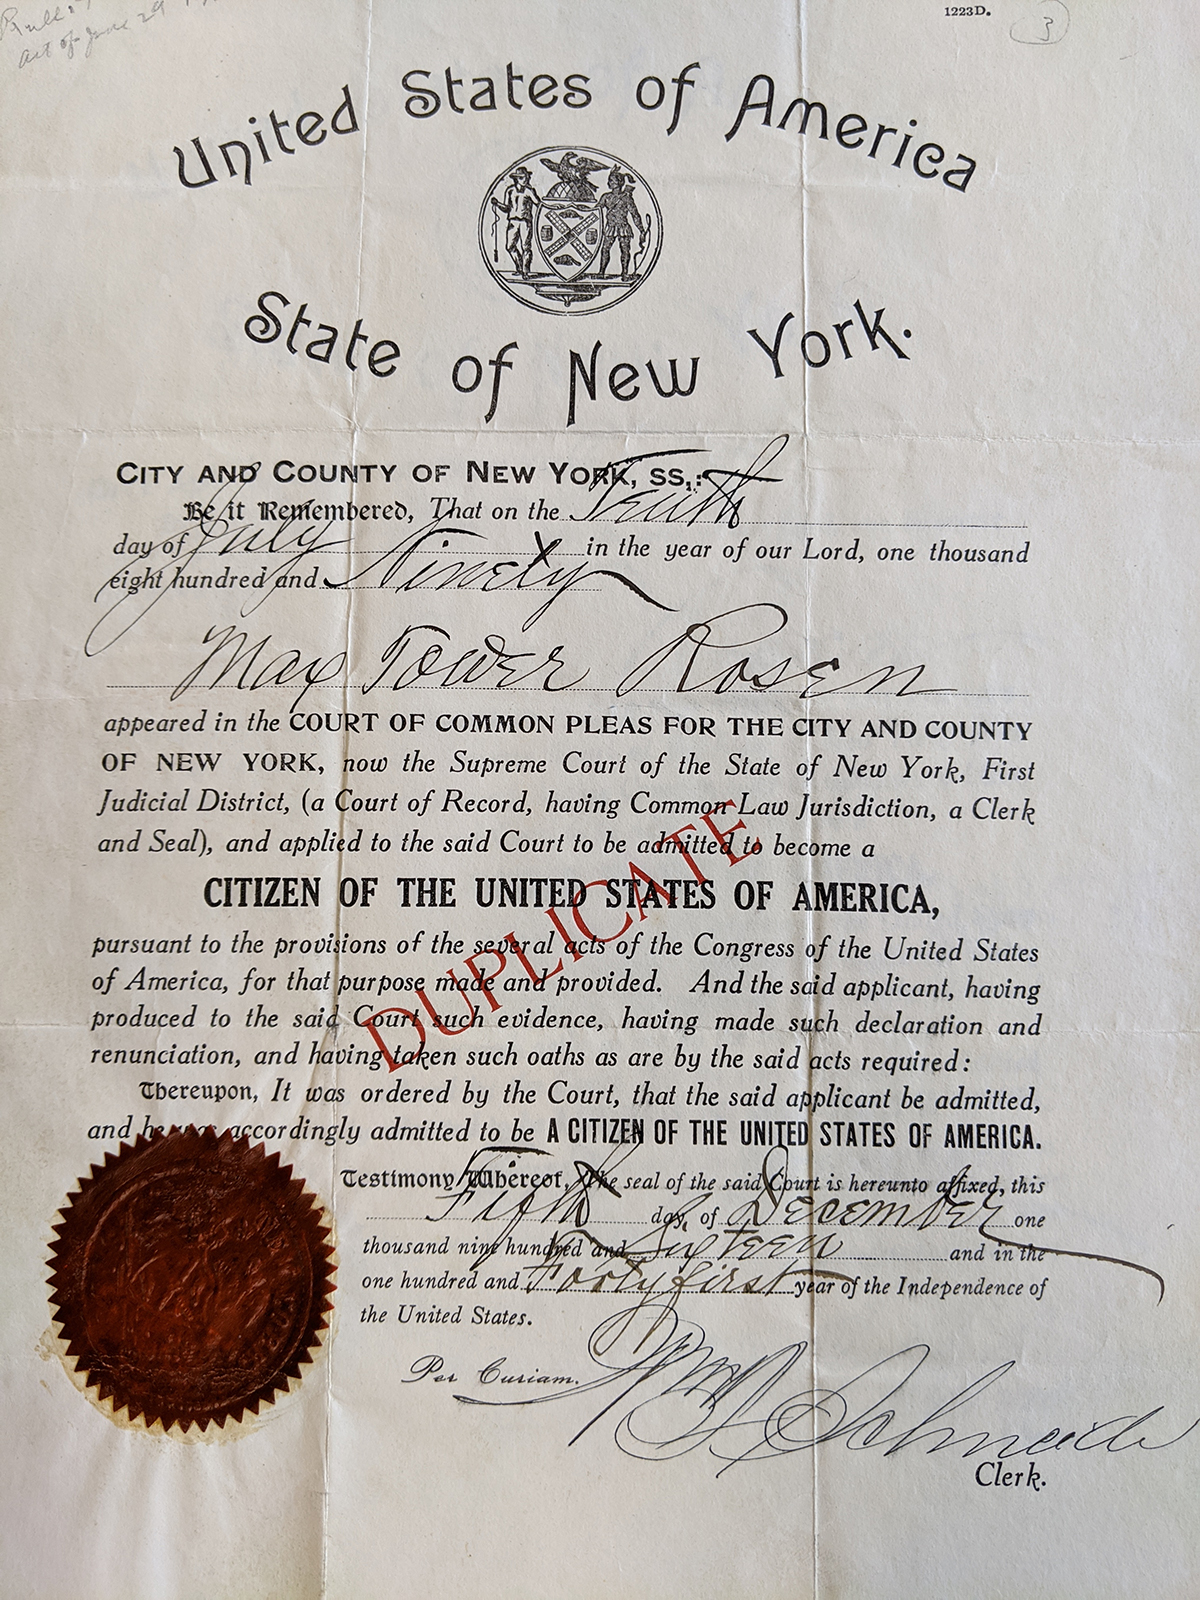 Naturalization Certificate for Walter Rosen's father, Max